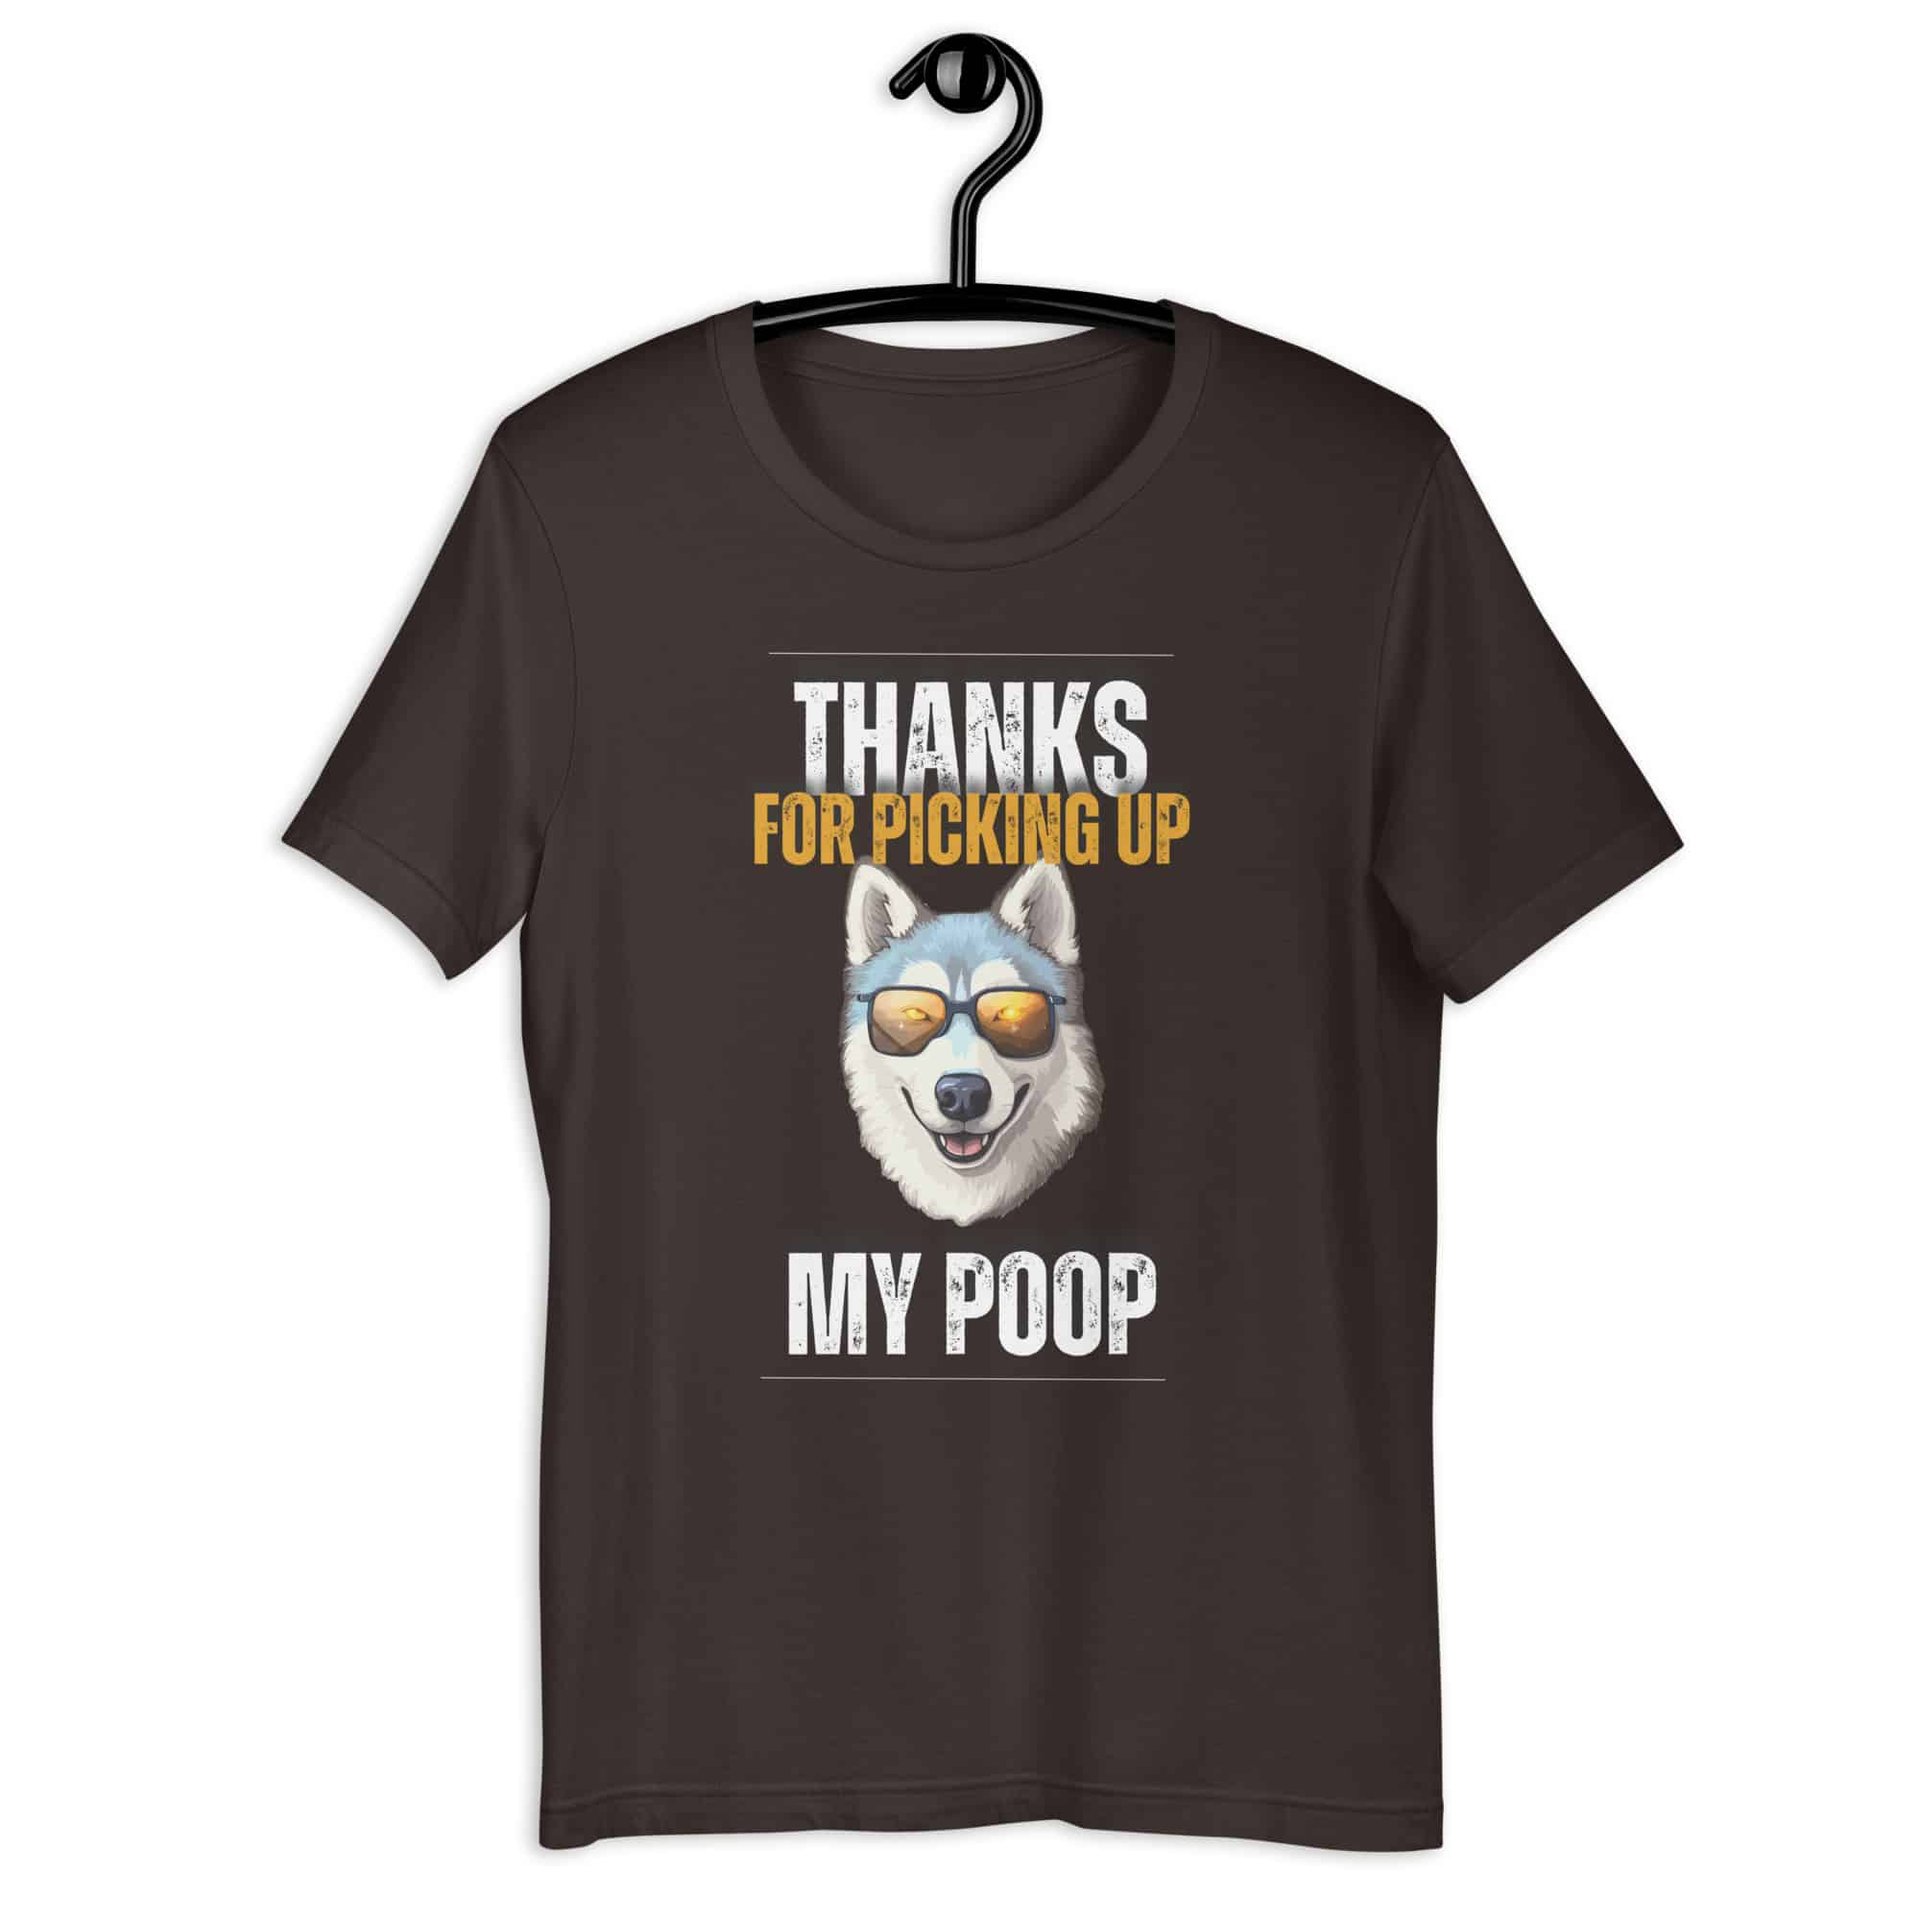 Thanks For Picking Up My POOP Funny Huskies Unisex T-Shirt. Brown